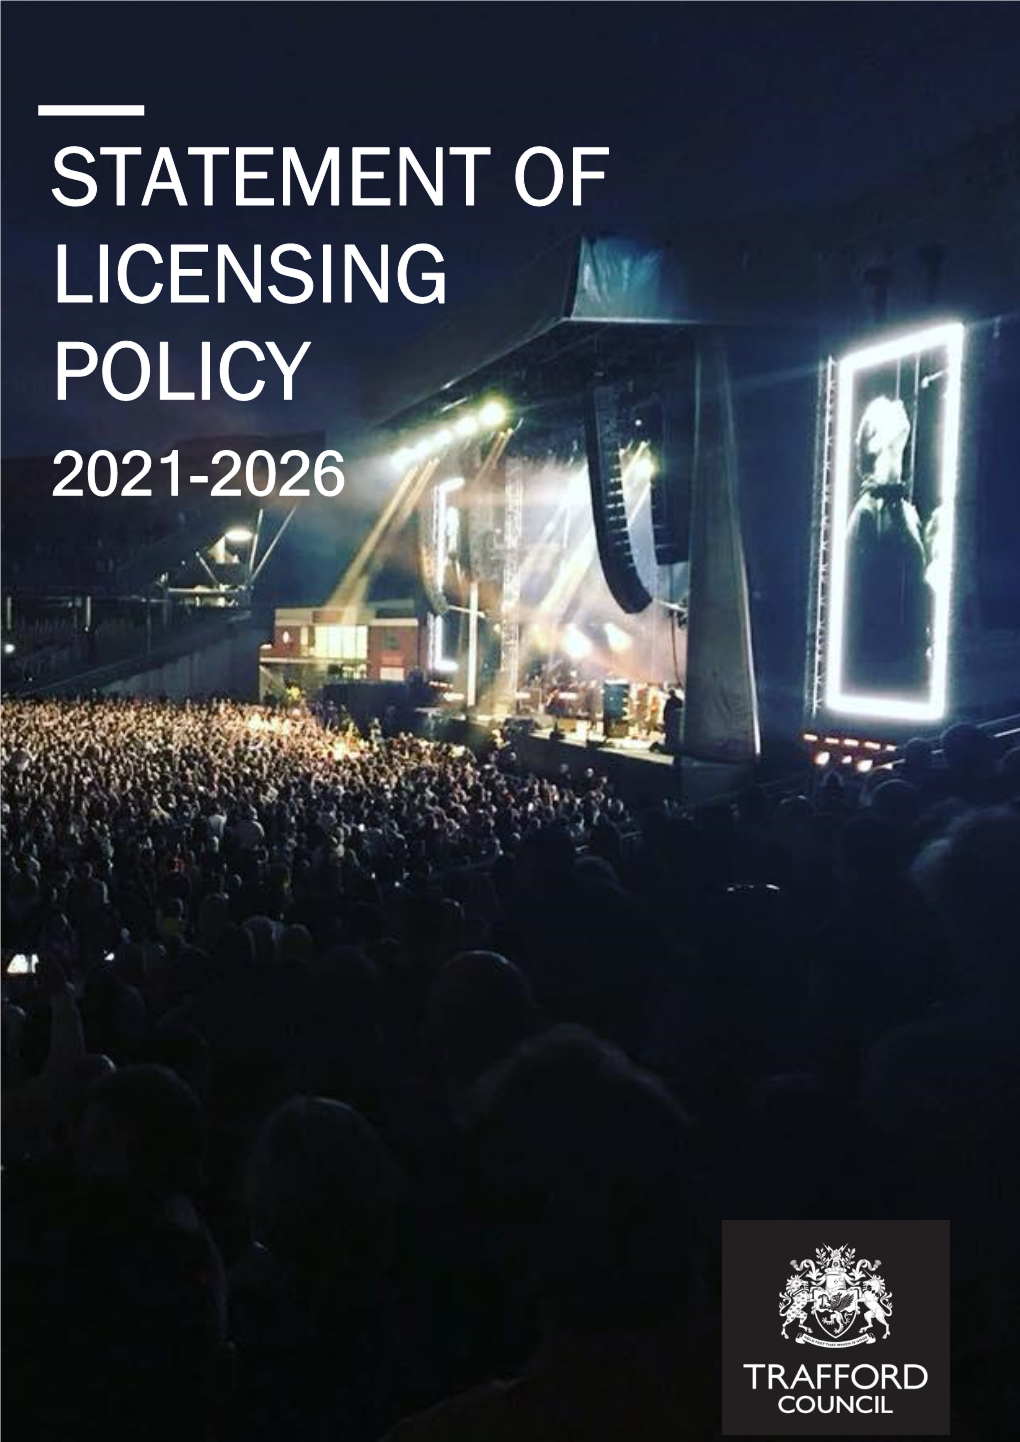 Trafford Council Statement of Licensing Policy 2021-2026